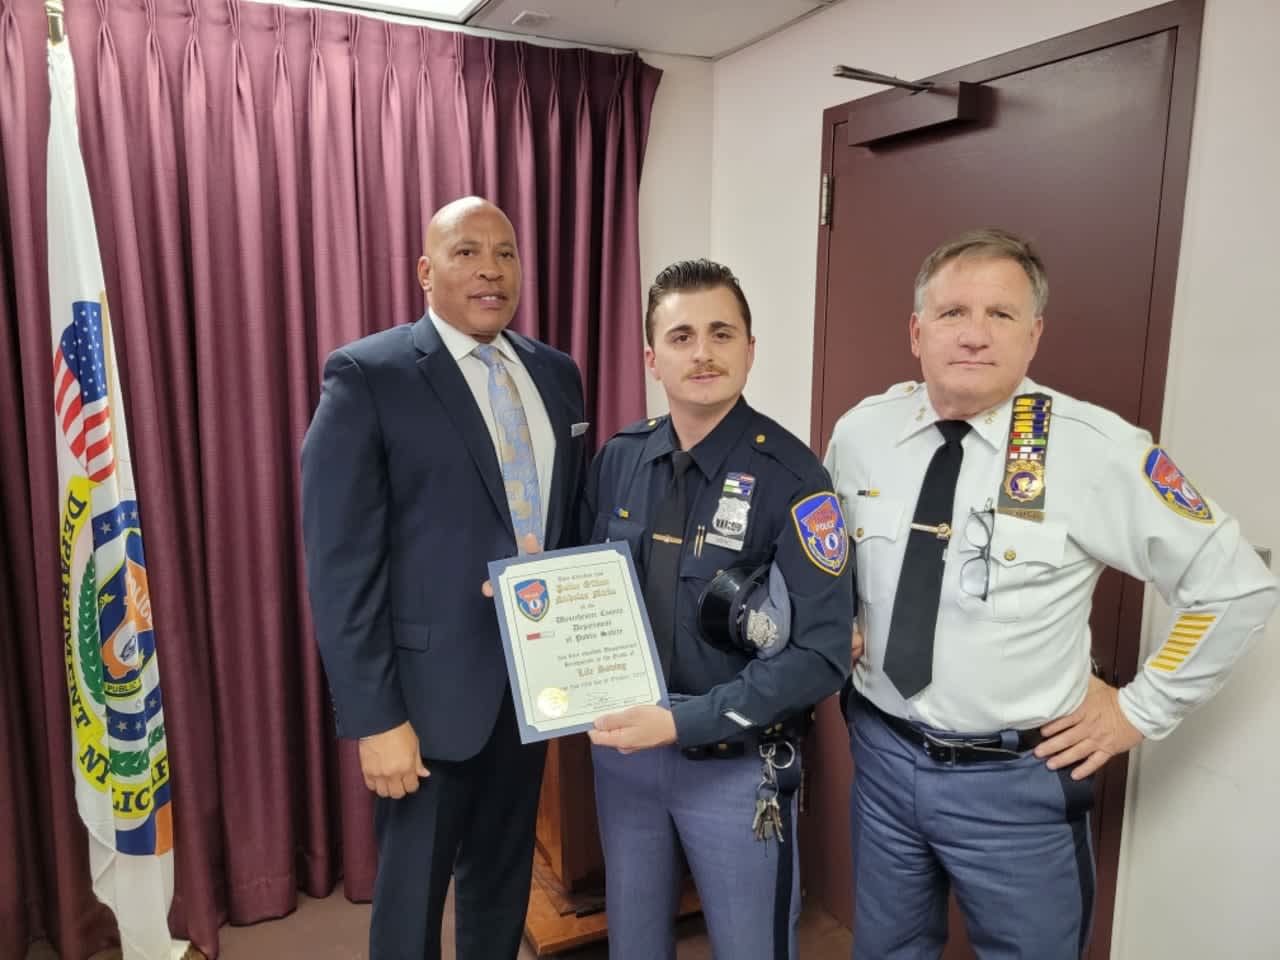 Officer Nicholas Mirko (center) of the Westchester County Police Department accepts a Lifesaving Medal on behalf of himself and Sgt. Michael Ritell.